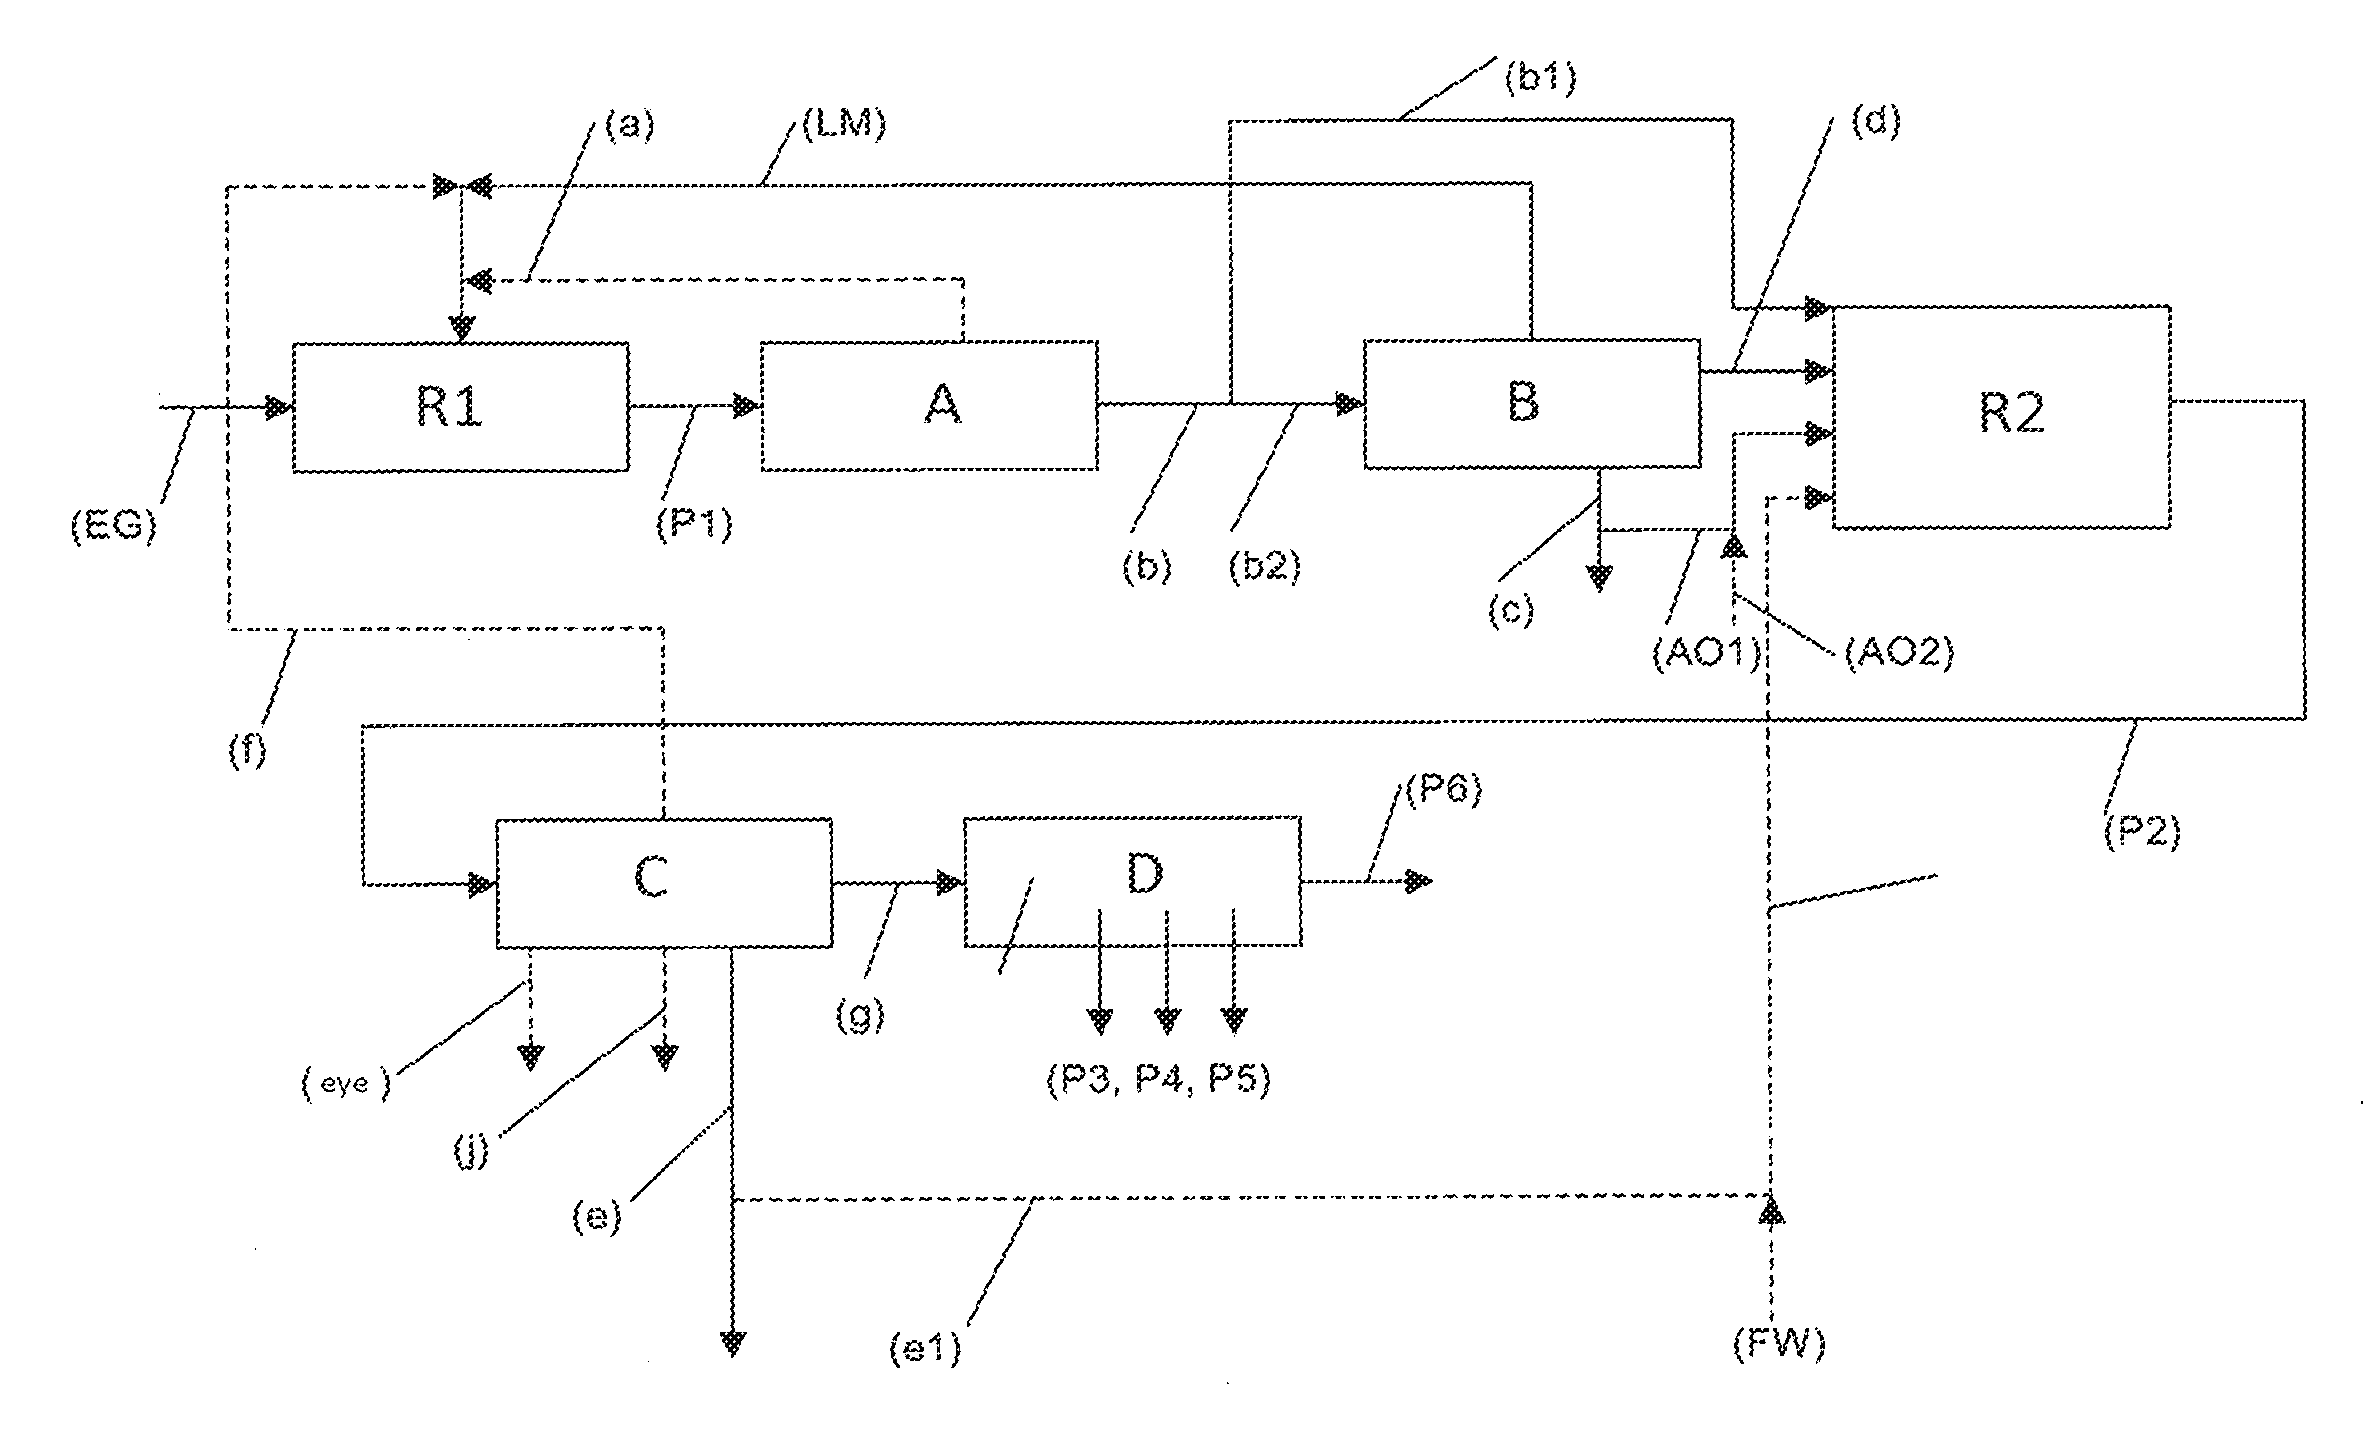 Process and apparatus for preparing alkylene oxides and alkylene glycols